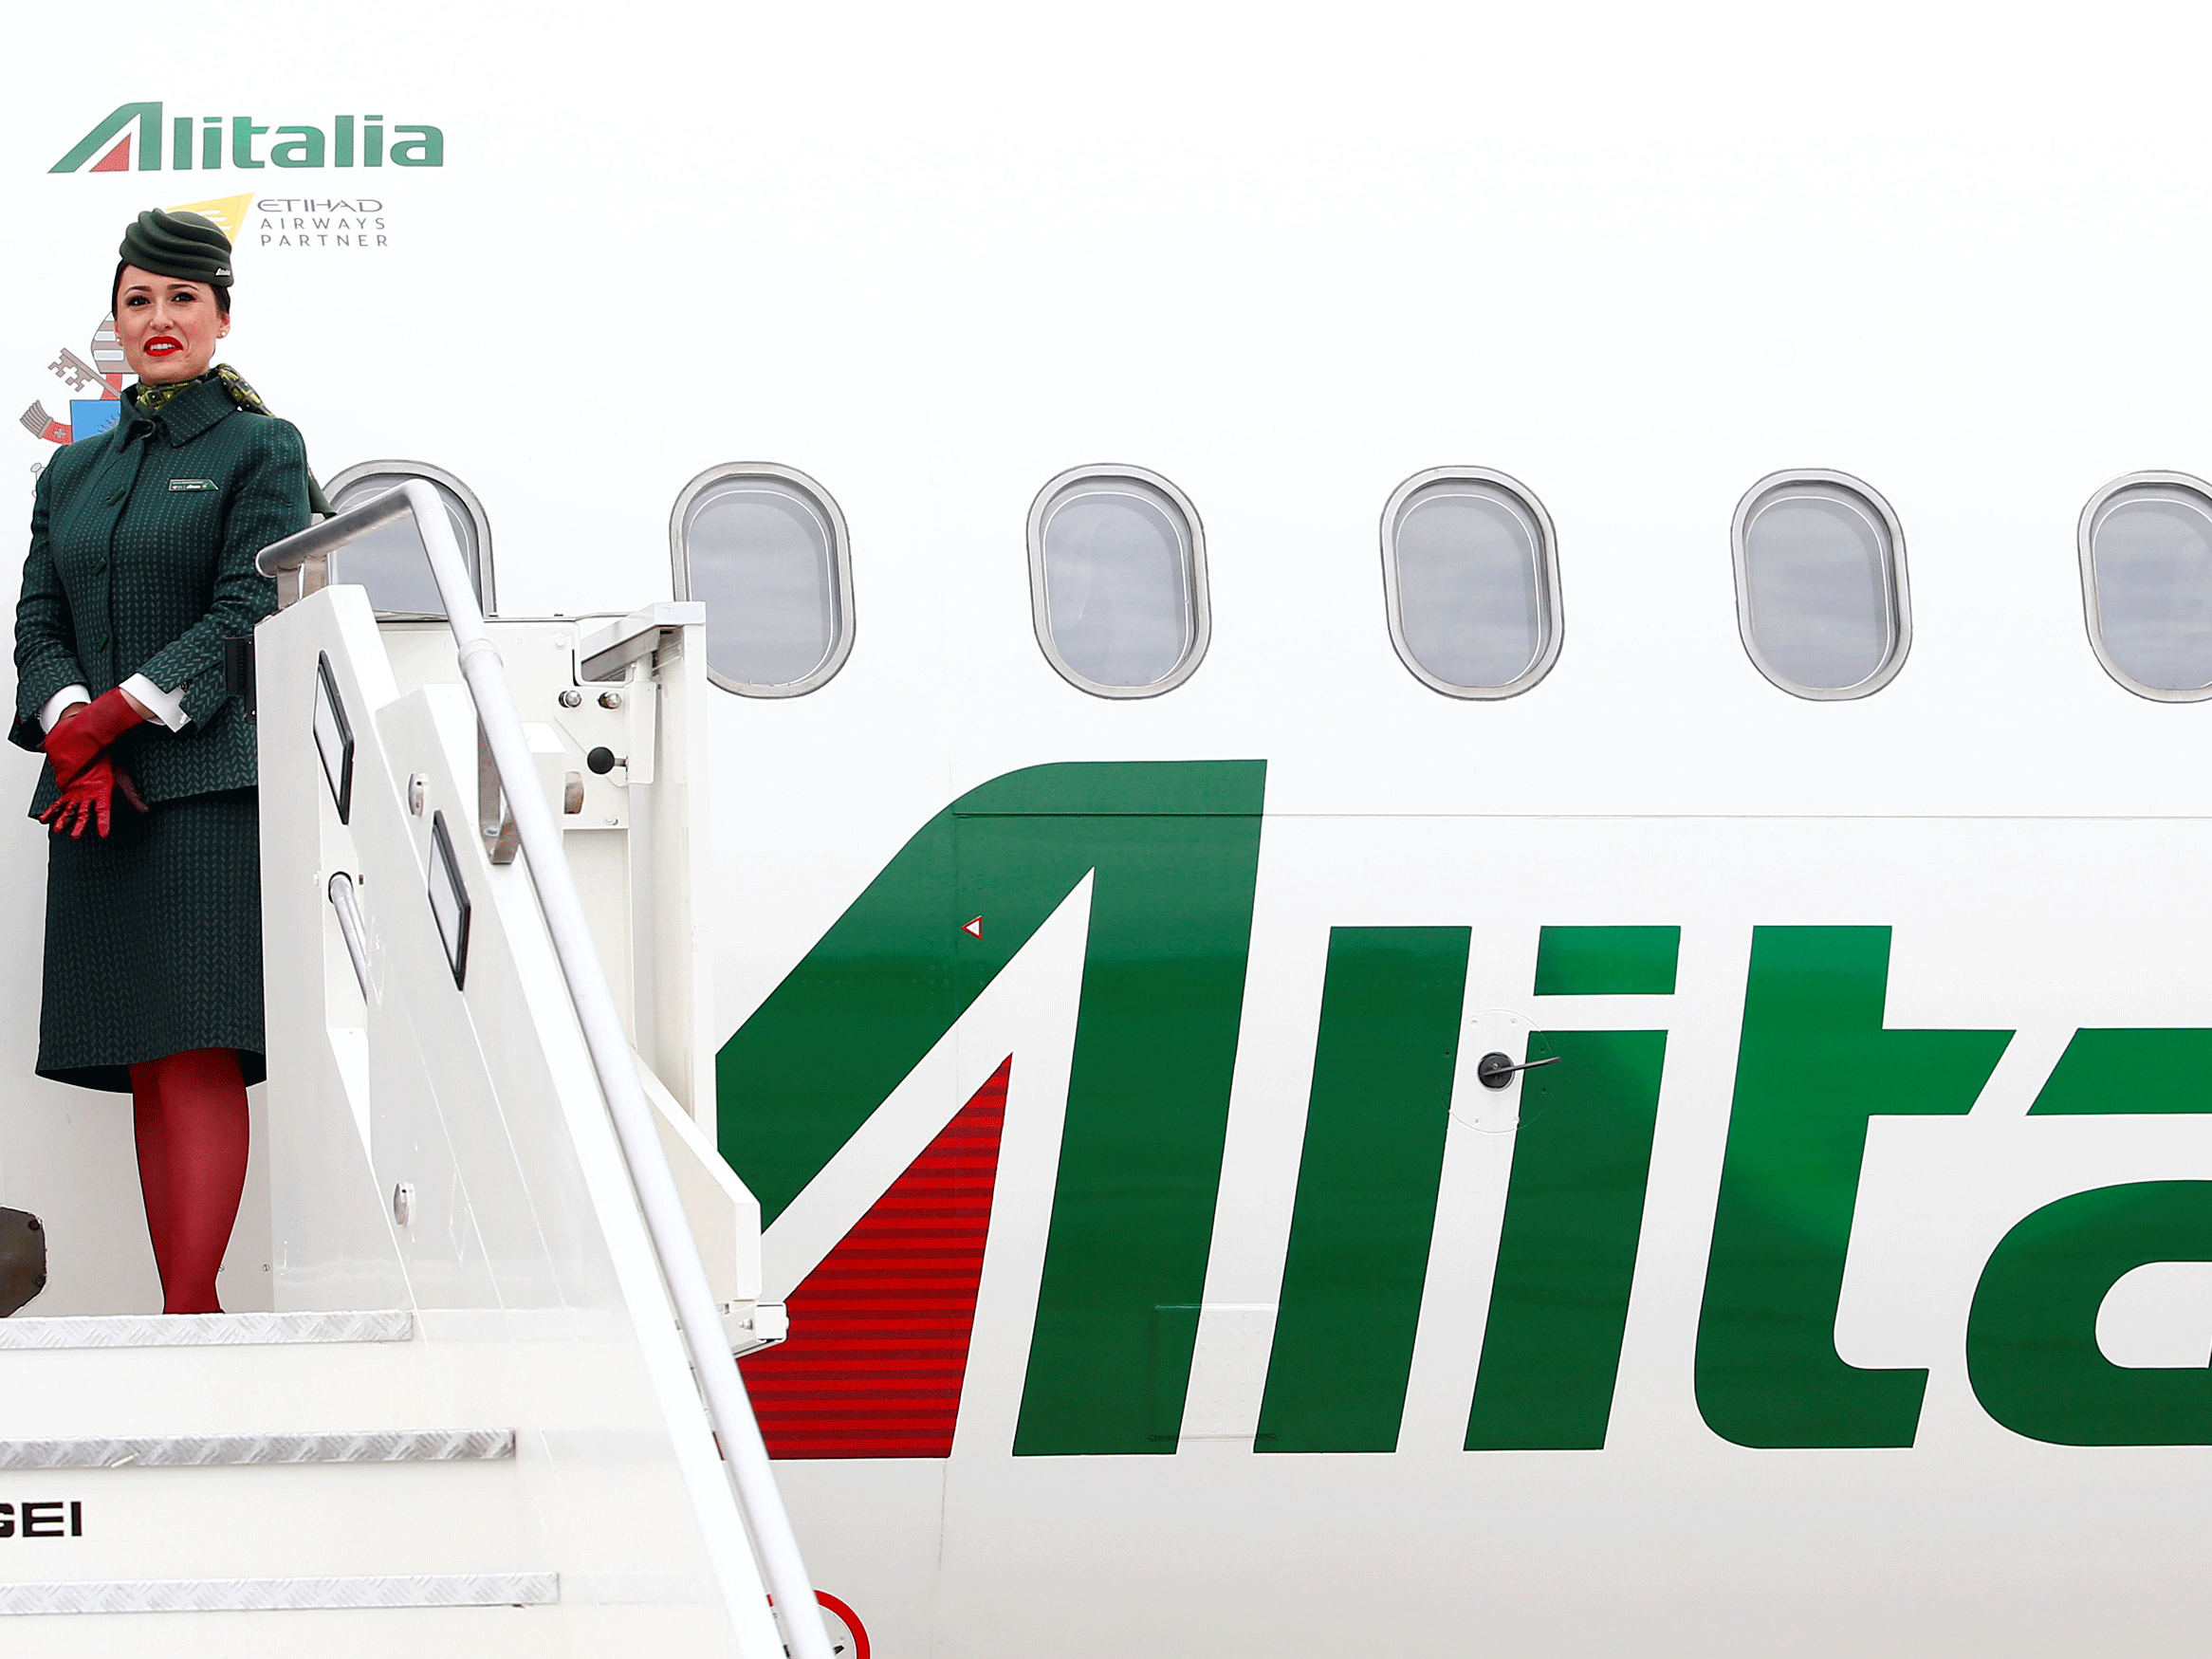 There are cheap fares to be had while Alitalia struggles for survival